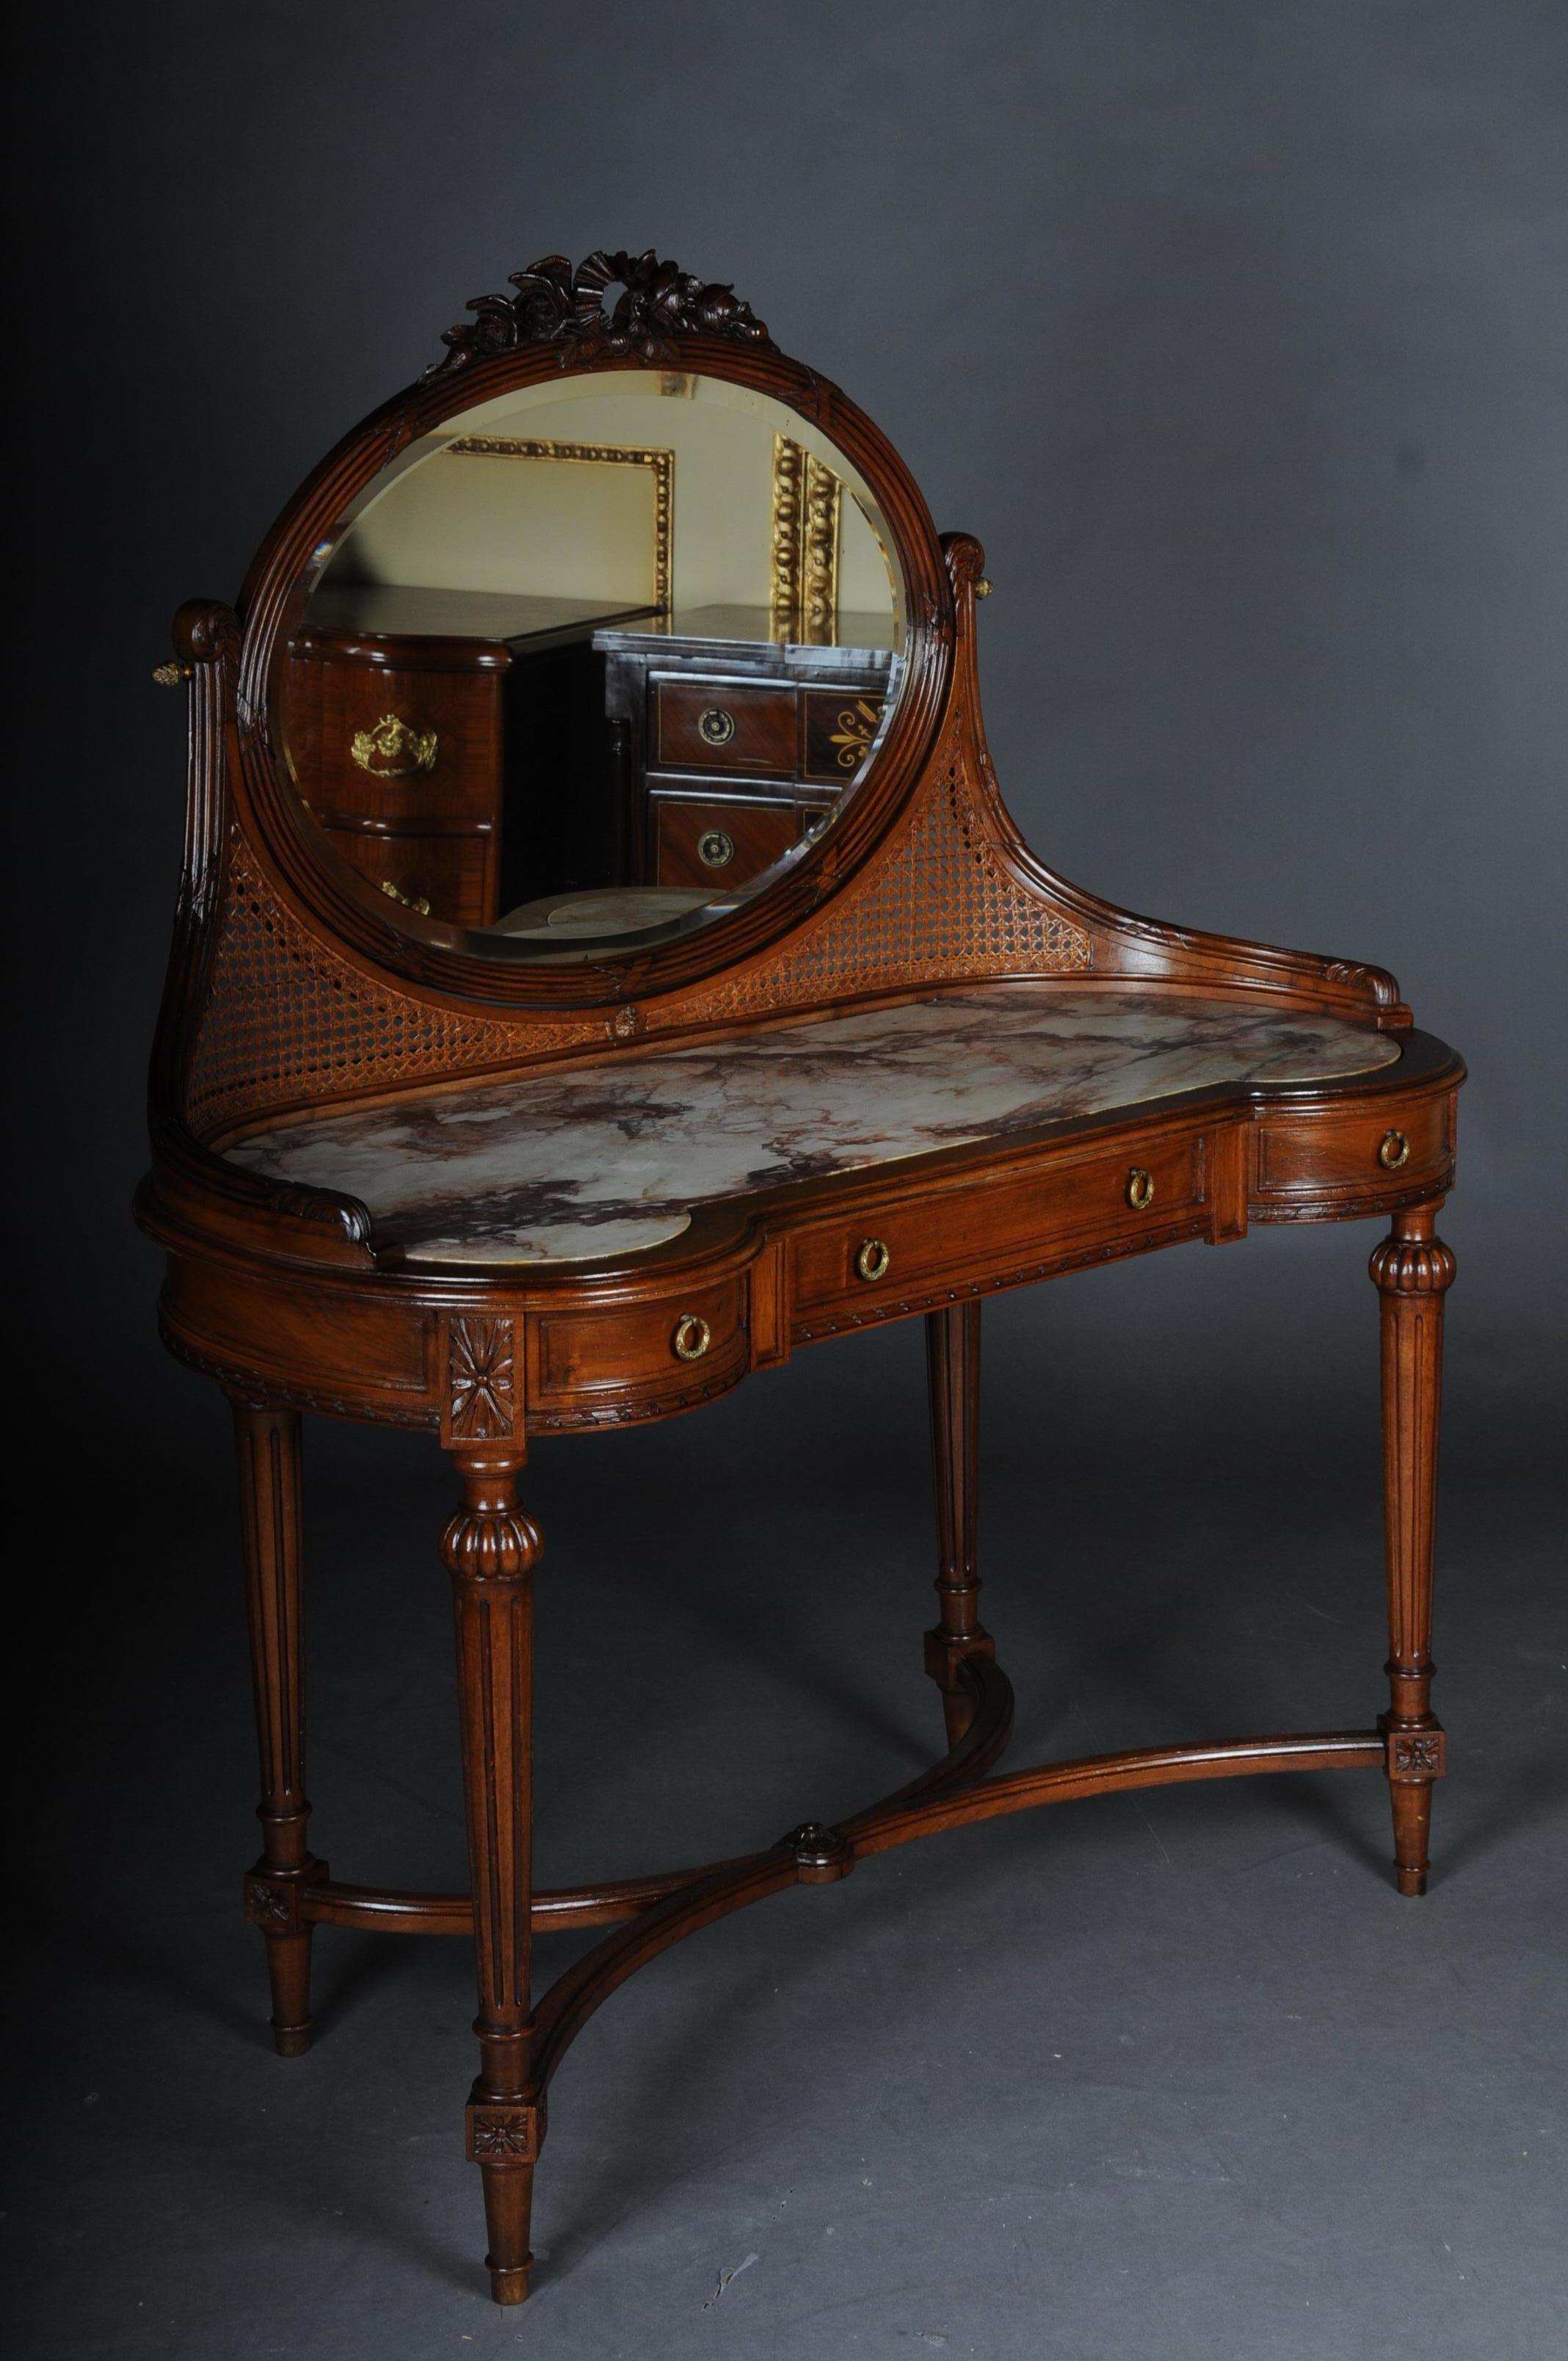 French dressing table / vanity table with mirror classicism

Solid wood hand-carved with rich neoclassical elements. France 19th century
Inlaid mottled marble cover plate. Sides box with 3 front bays. Adjustable, oval mirror with framed, profiled